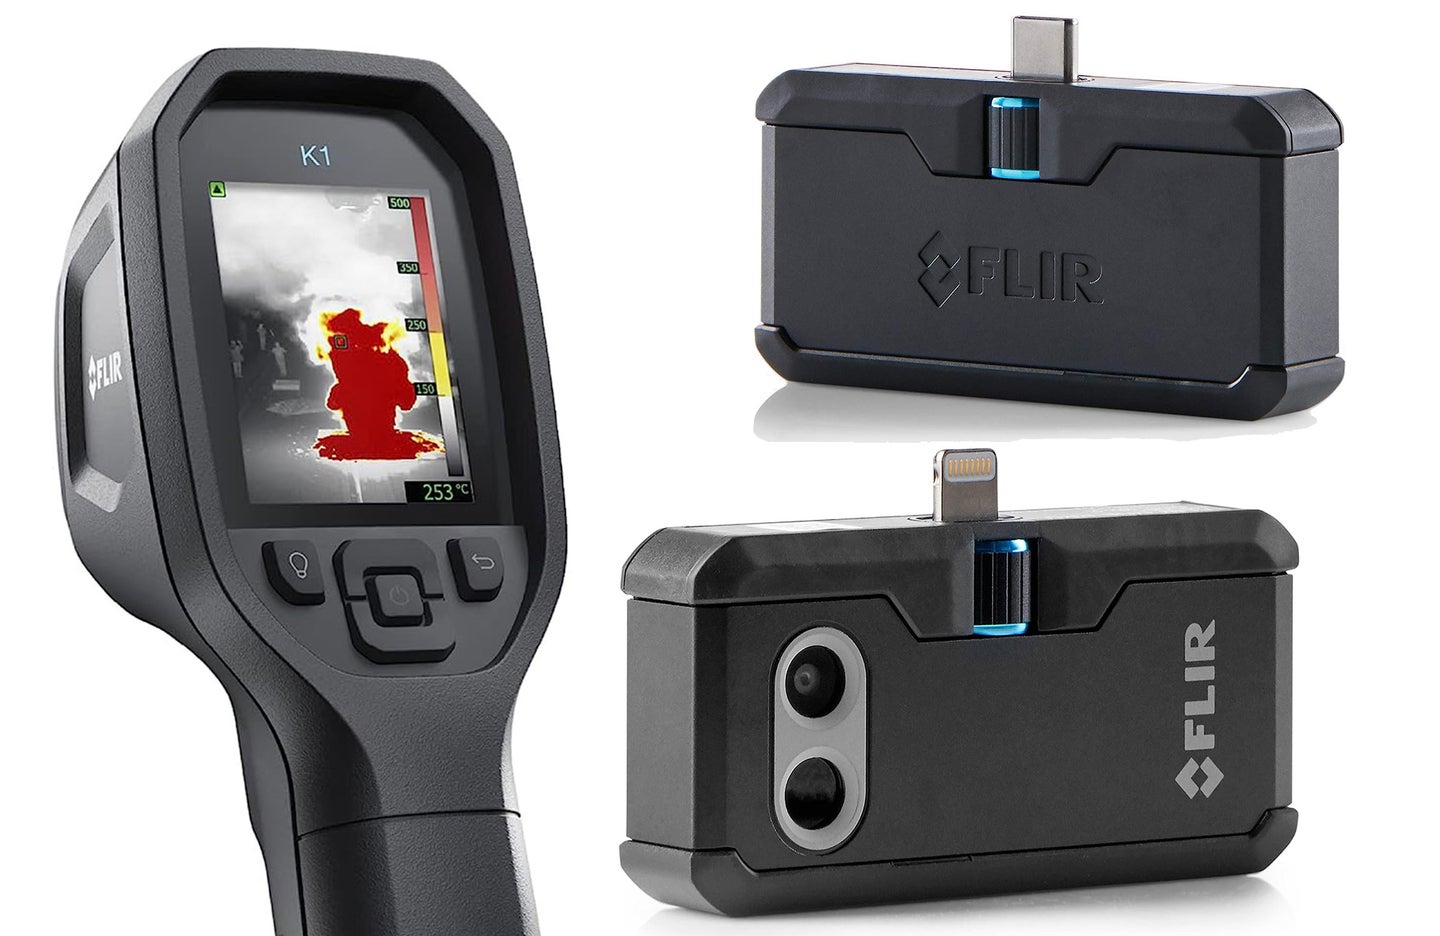 Flir thermal cameras are on-sale for Prime Day